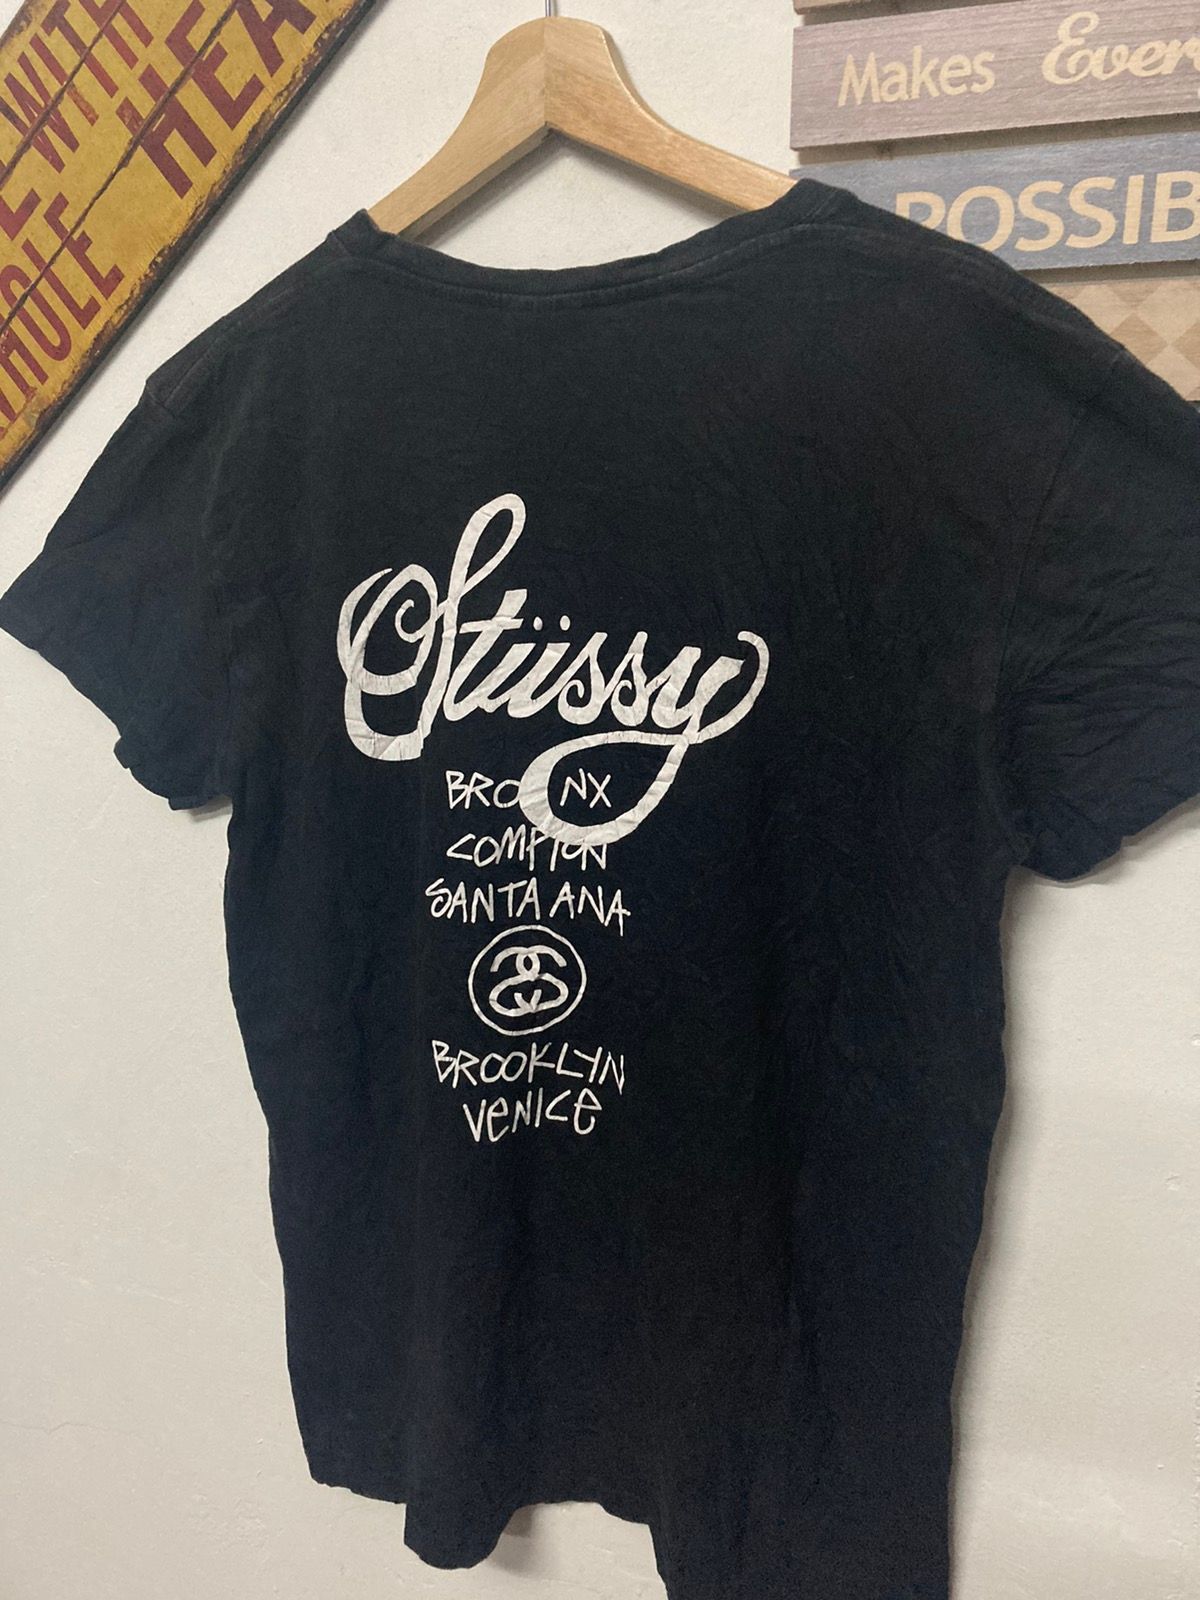 Stussy Tour Shirt For Women in XL size - 6